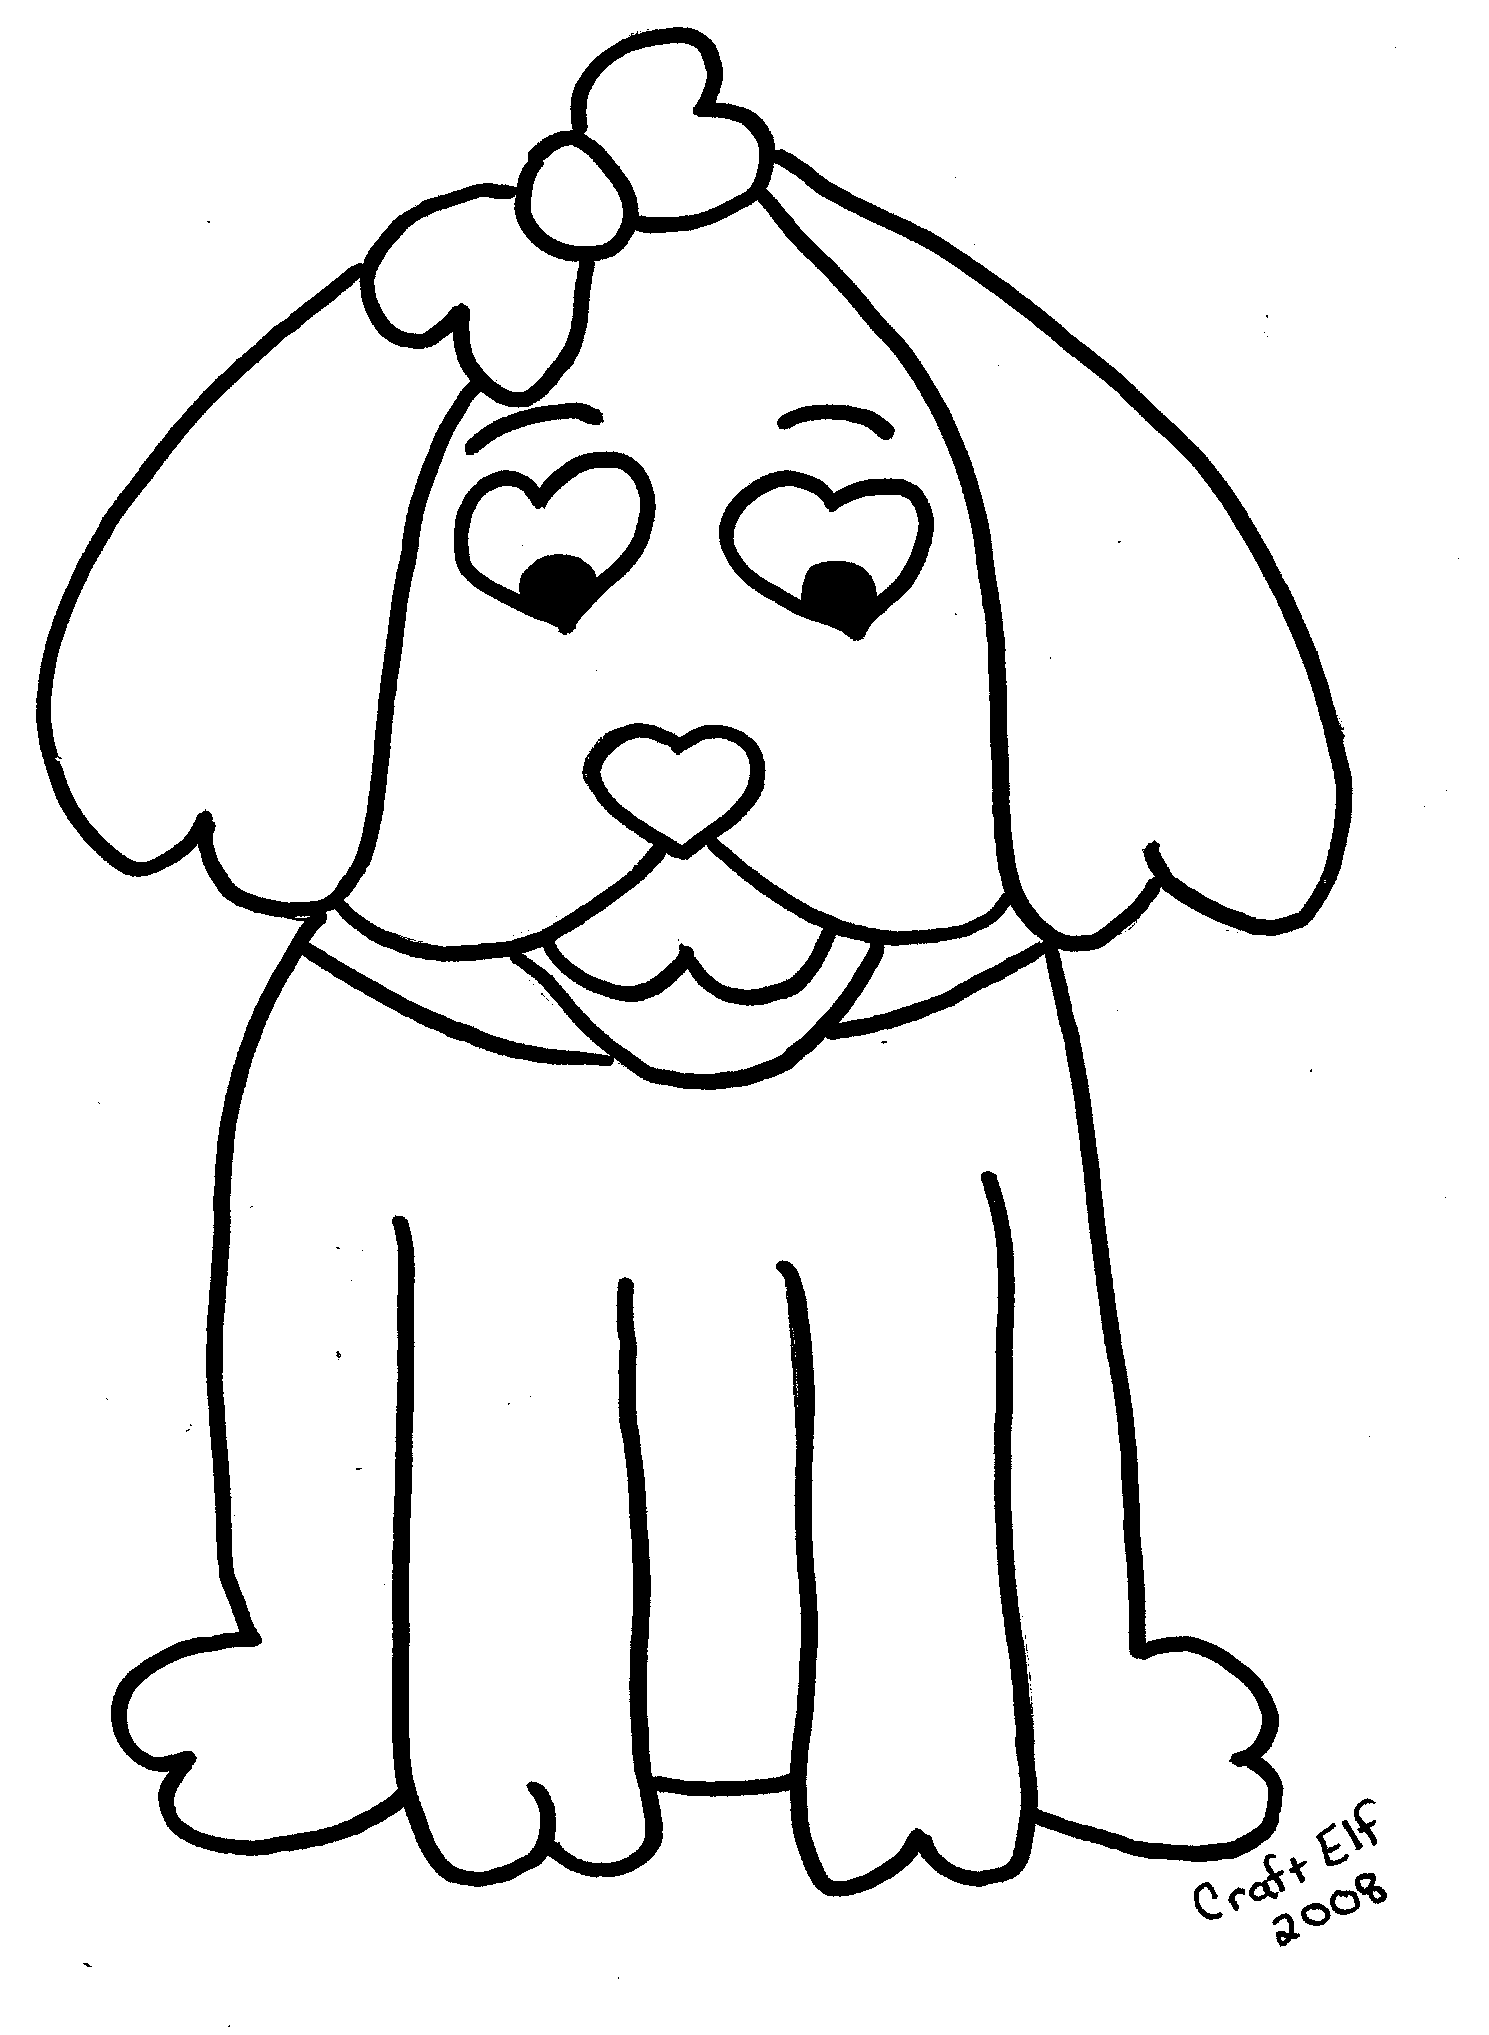 free dog coloring page - great family activity